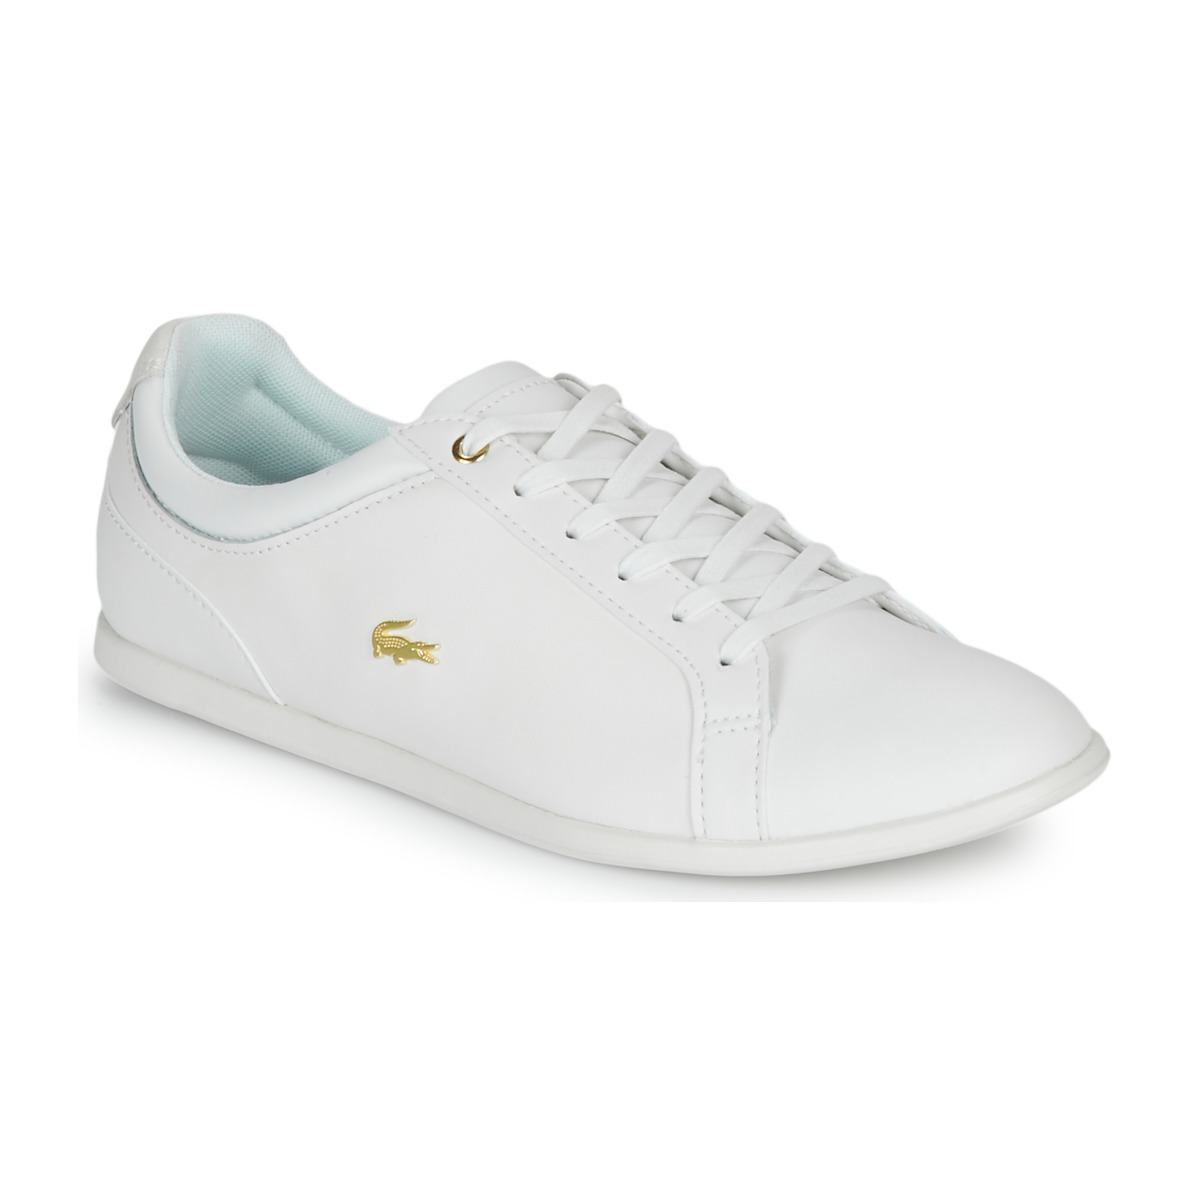 lacoste shoes white and gold